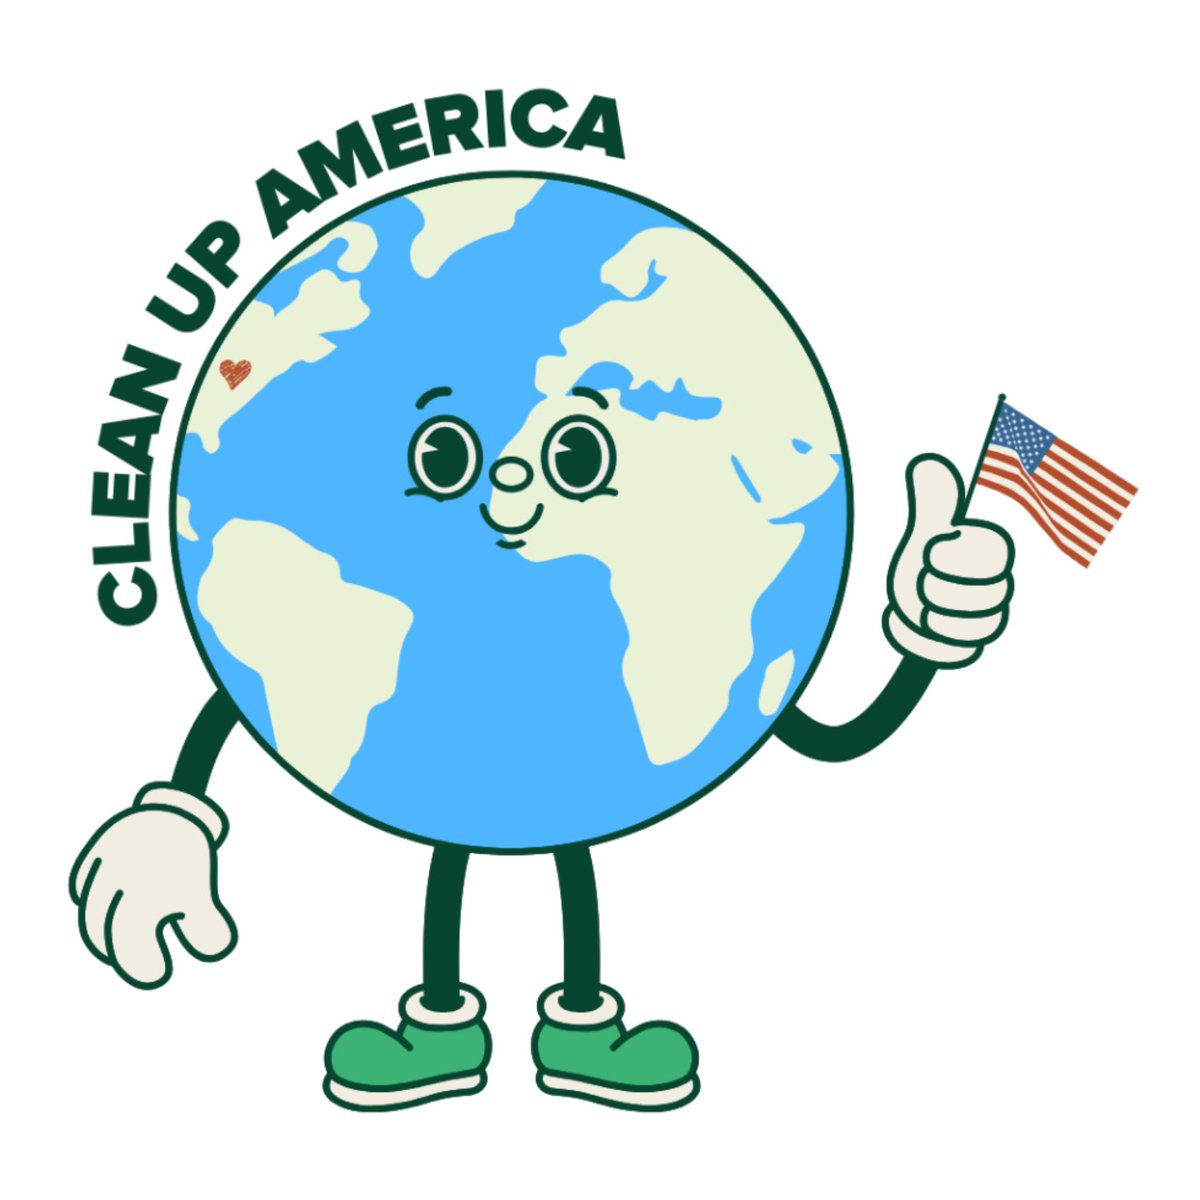 ACC's gearing up to Clean Up America in honor of #EarthDay, so naturally we had to create a little mascot for the occasion. Sign up today for our individual or team challenge to compete and maybe see more of this lil guy down the line acc.eco/clean-up-ameri…